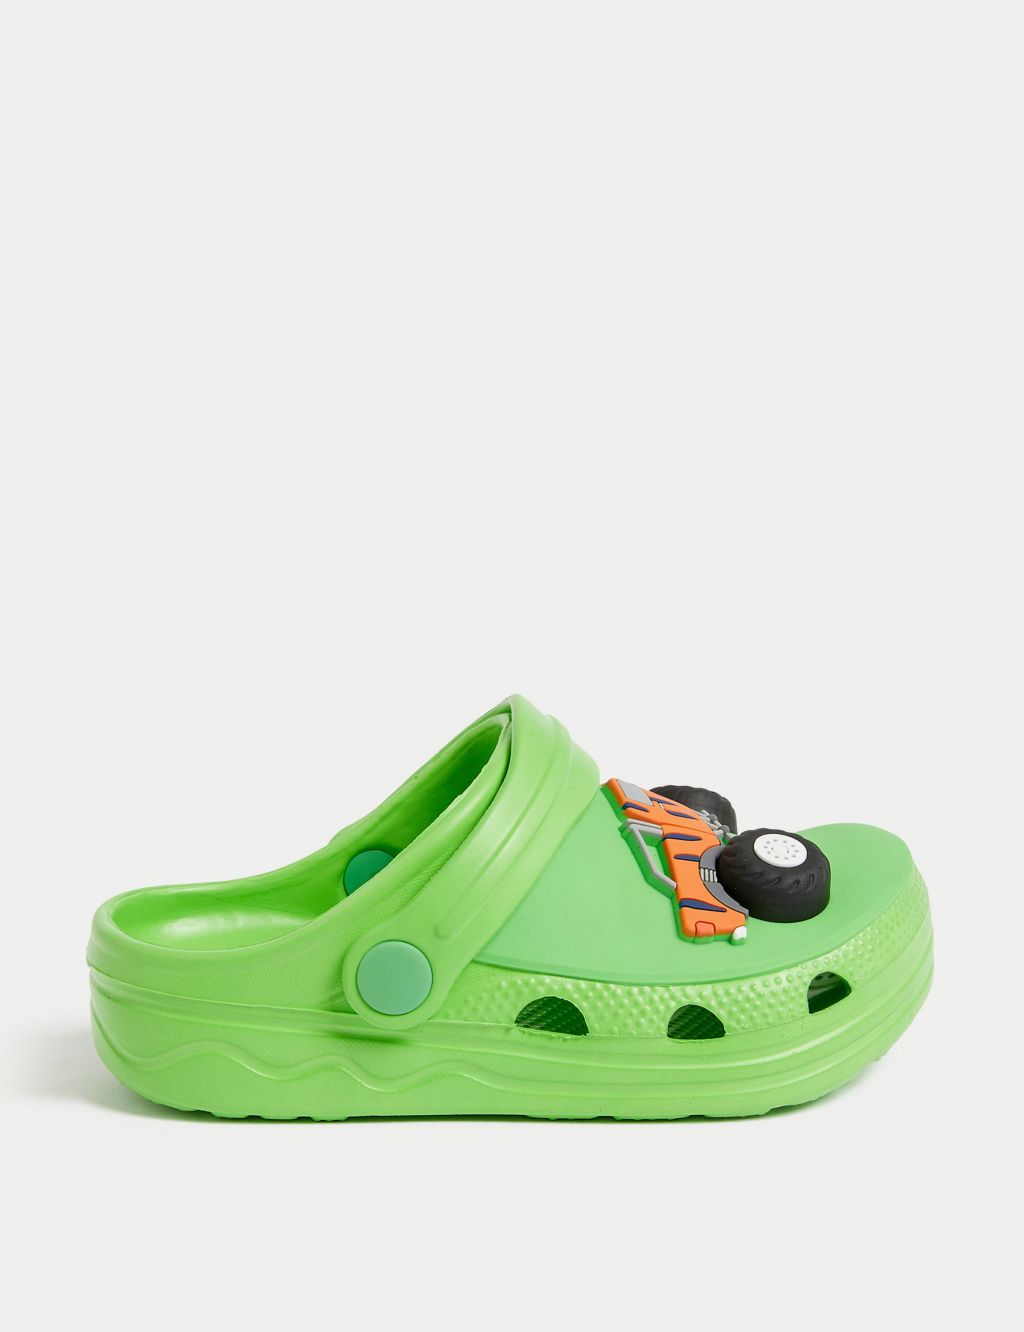 Kids' Truck Clogs (4 Small - 13 Small) image 1